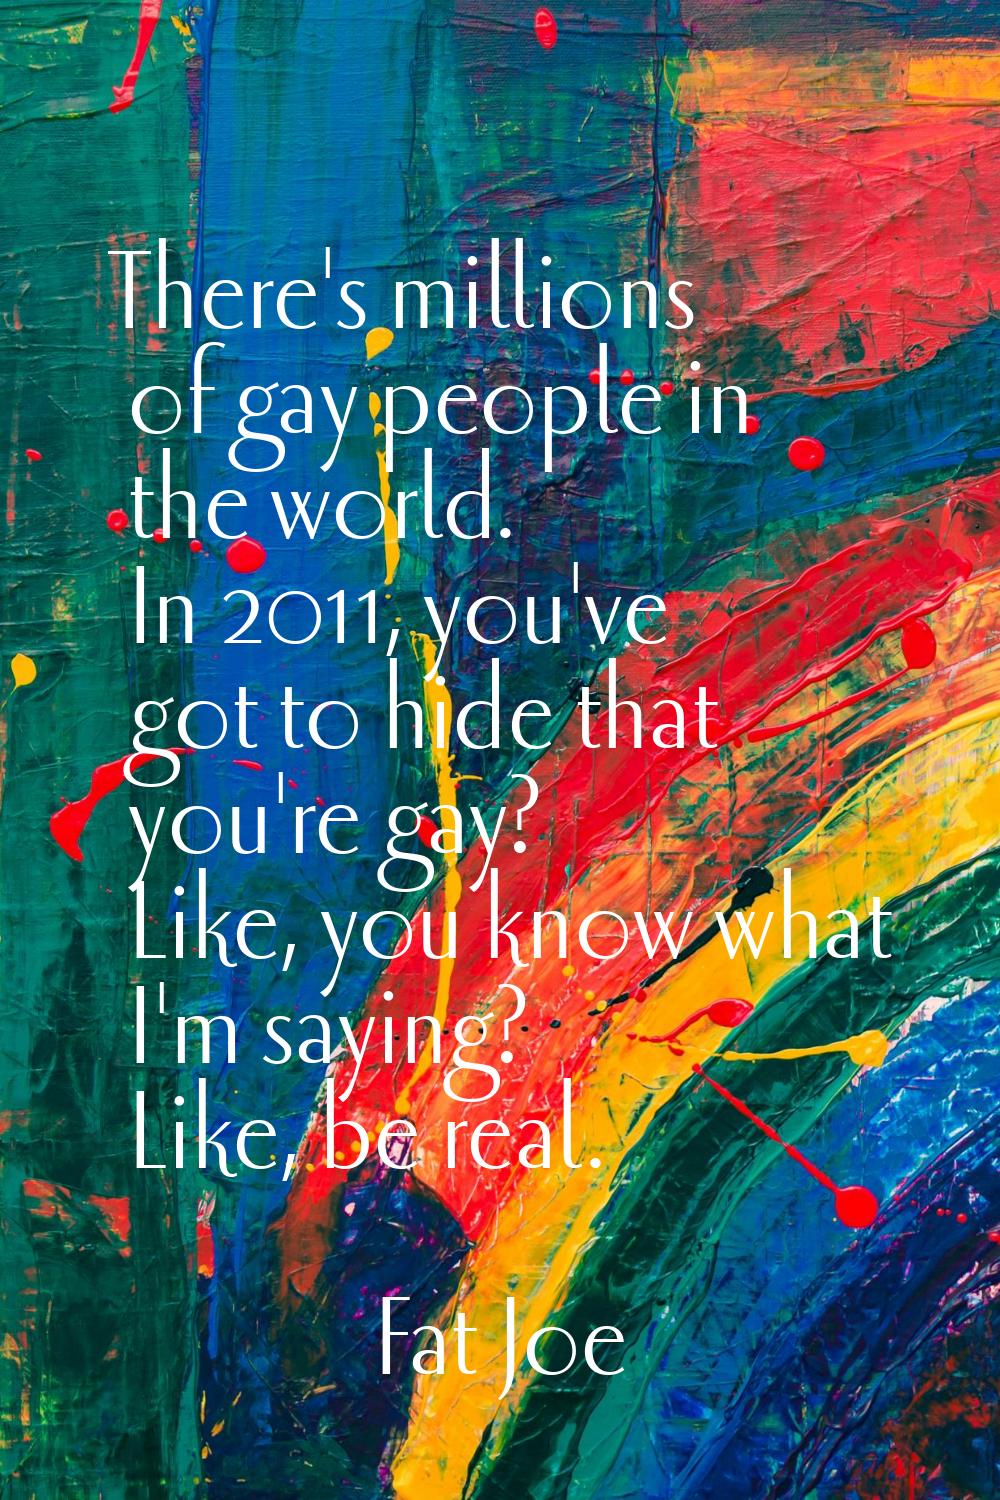 There's millions of gay people in the world. In 2011, you've got to hide that you're gay? Like, you